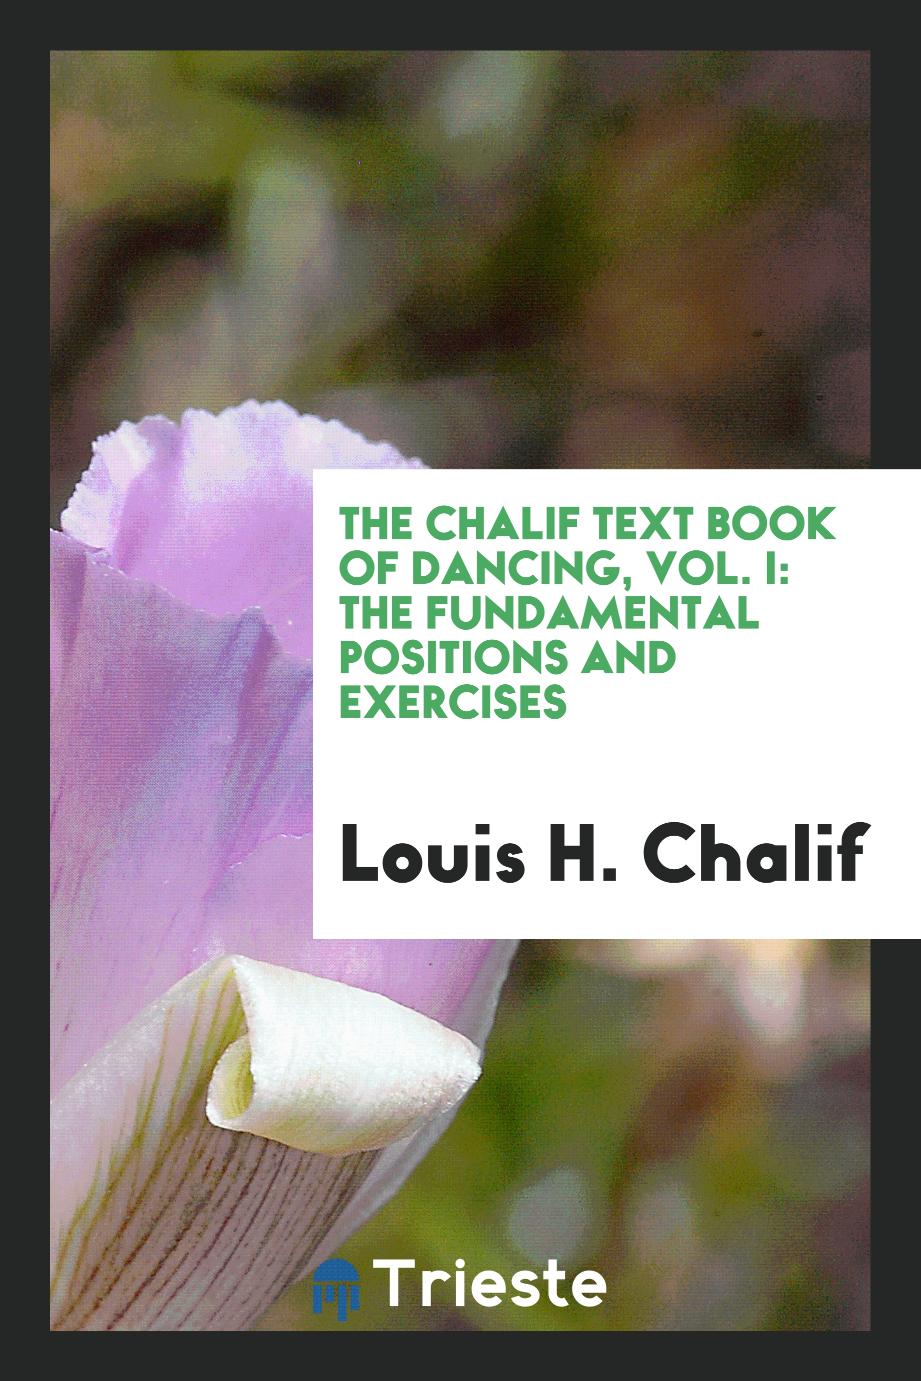 The Chalif text book of dancing, Vol. I: The fundamental positions and exercises